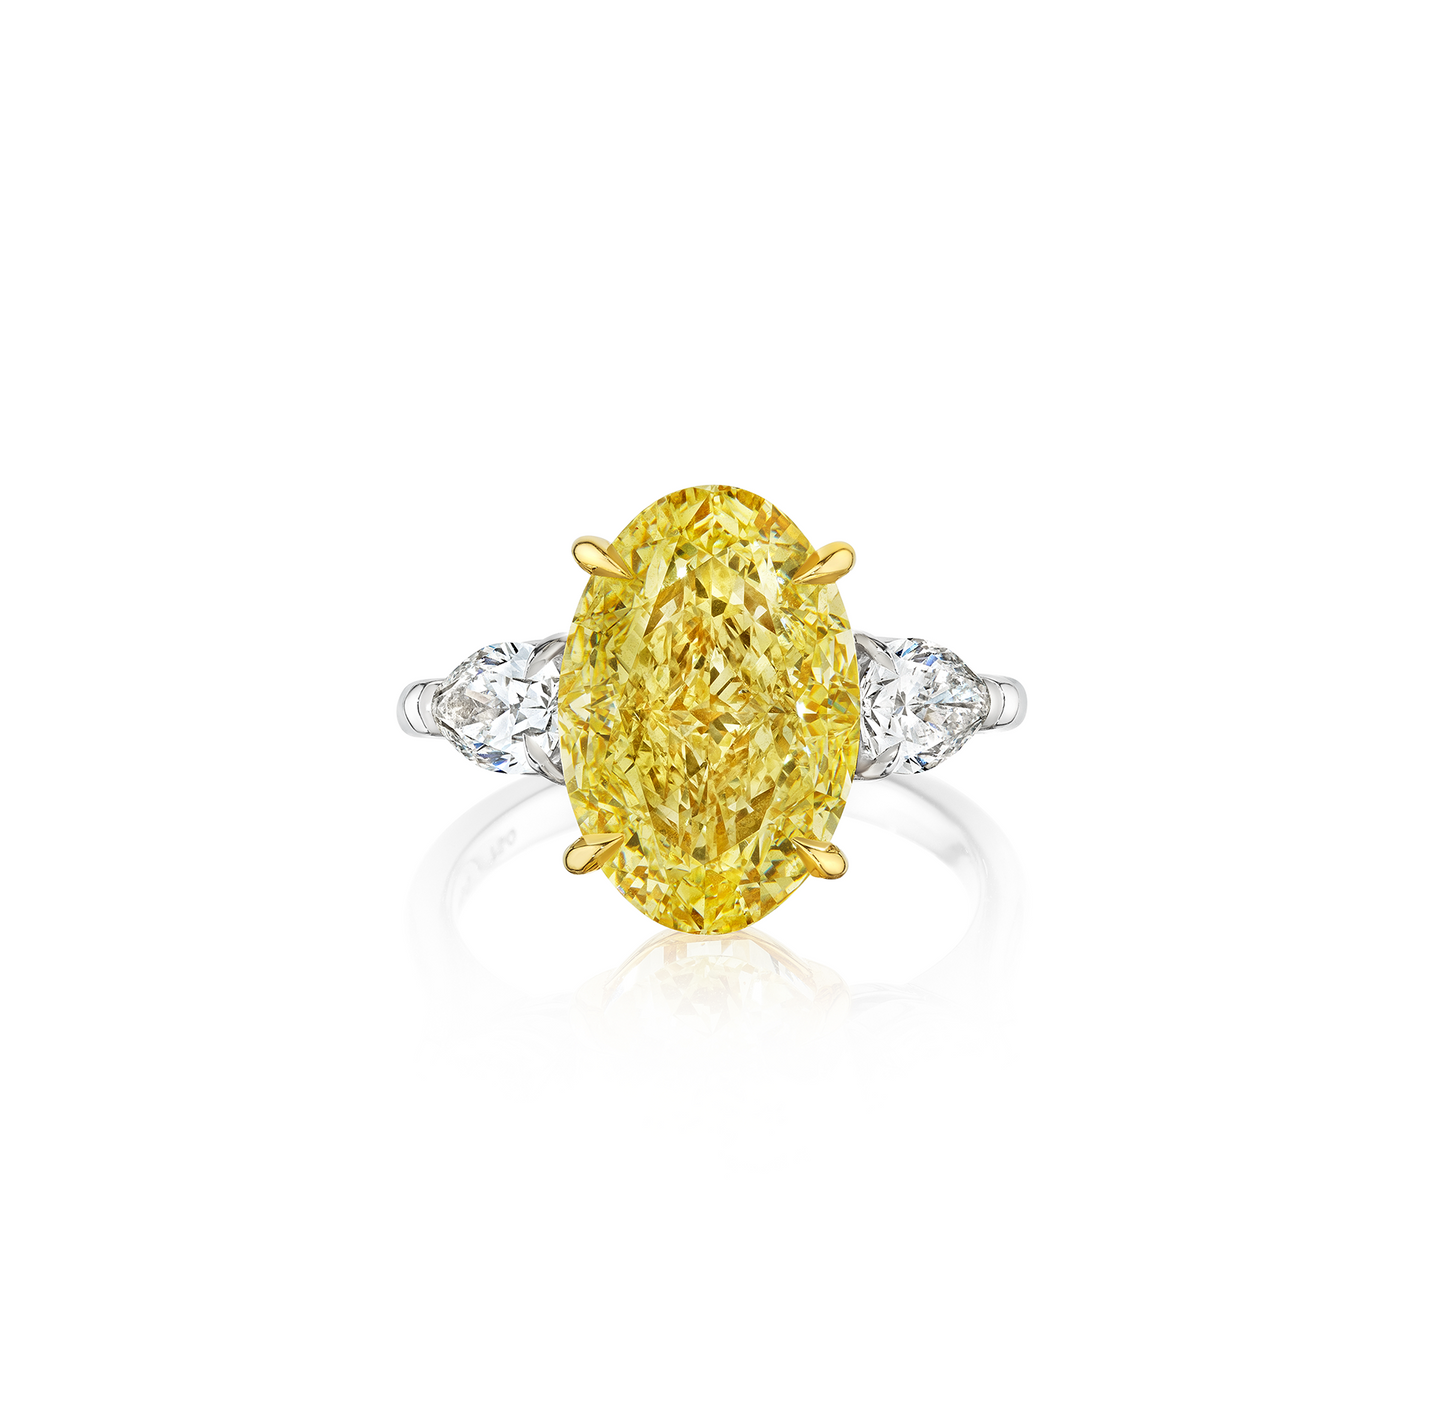 Fink's Exclusive Fancy Light Yellow Oval and Pear Diamond Engagement Ring